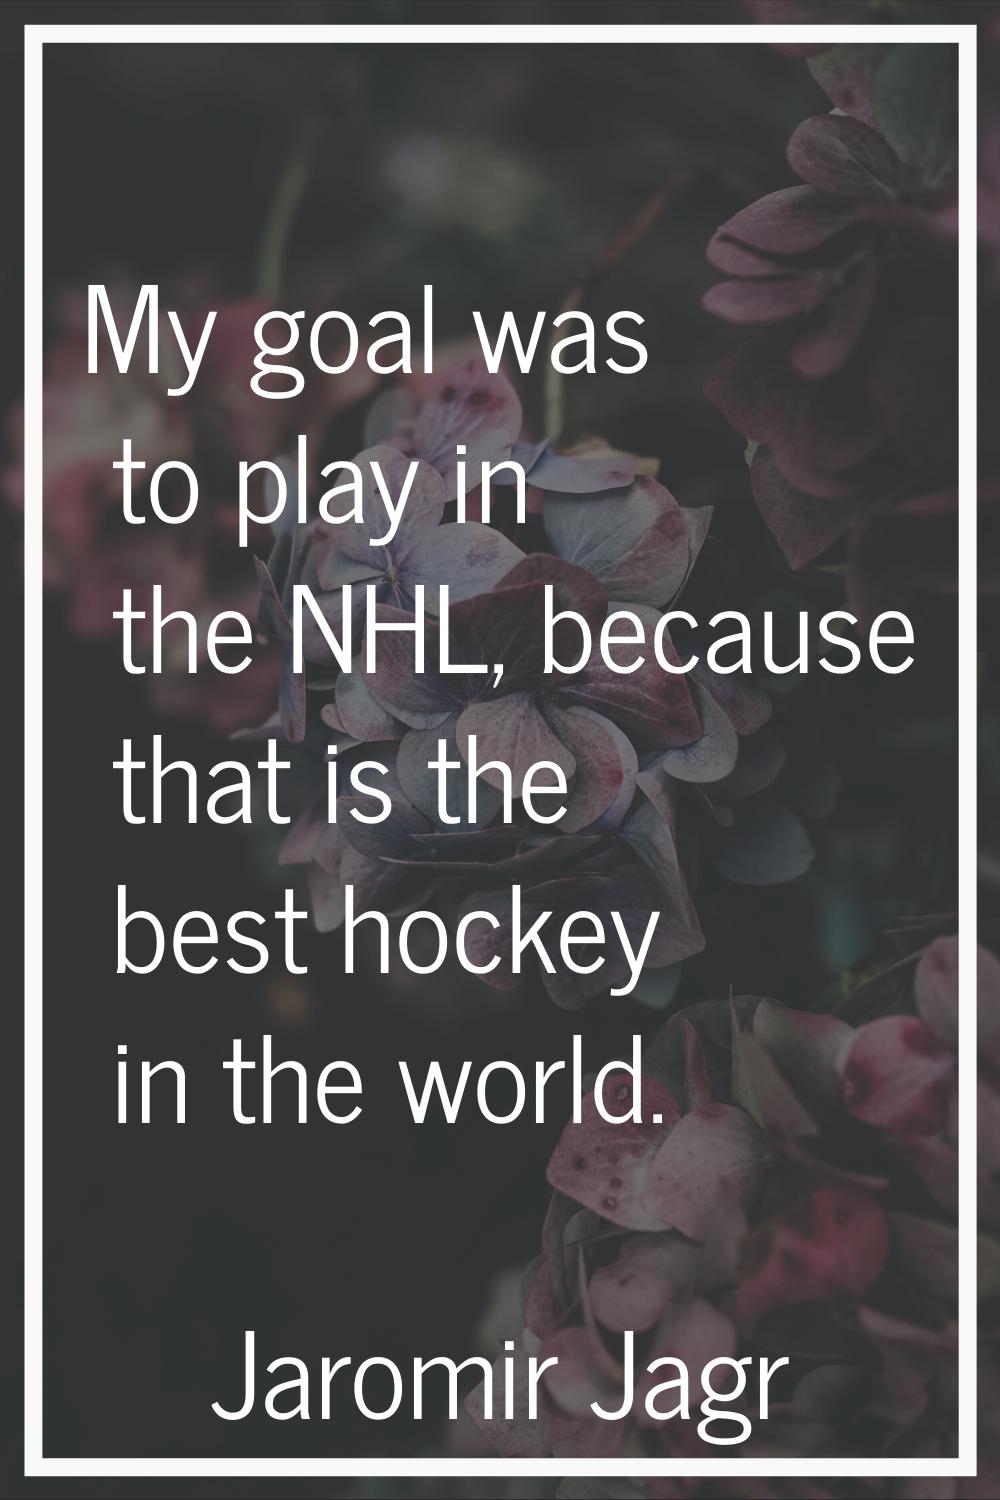 My goal was to play in the NHL, because that is the best hockey in the world.